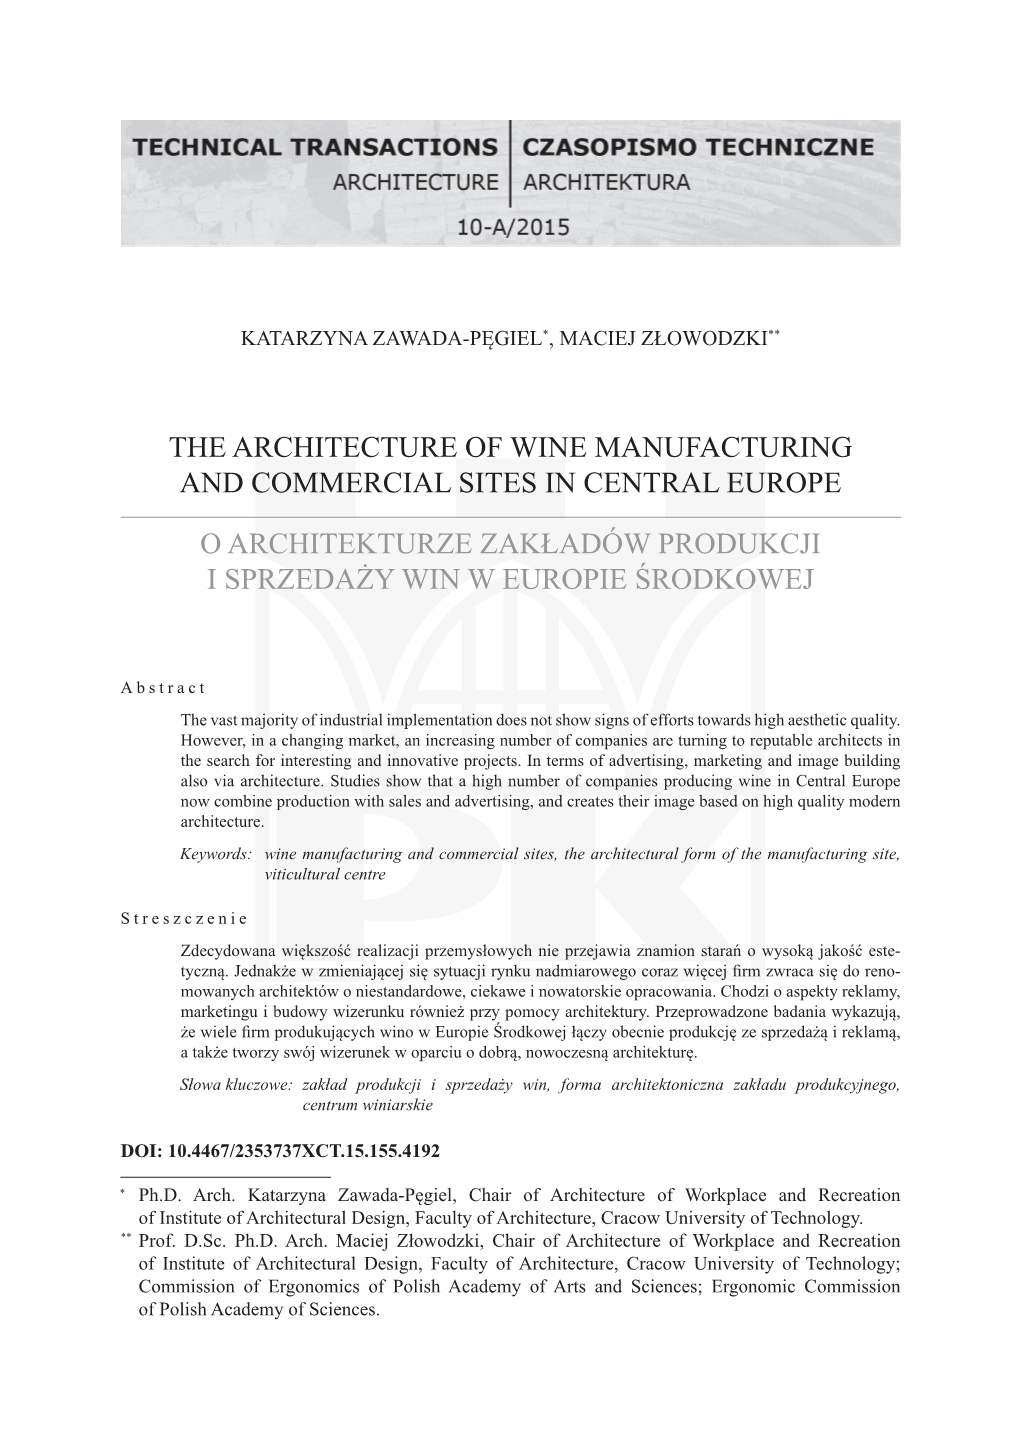 The Architecture of Wine Manufacturing and Commercial Sites in Central Europe